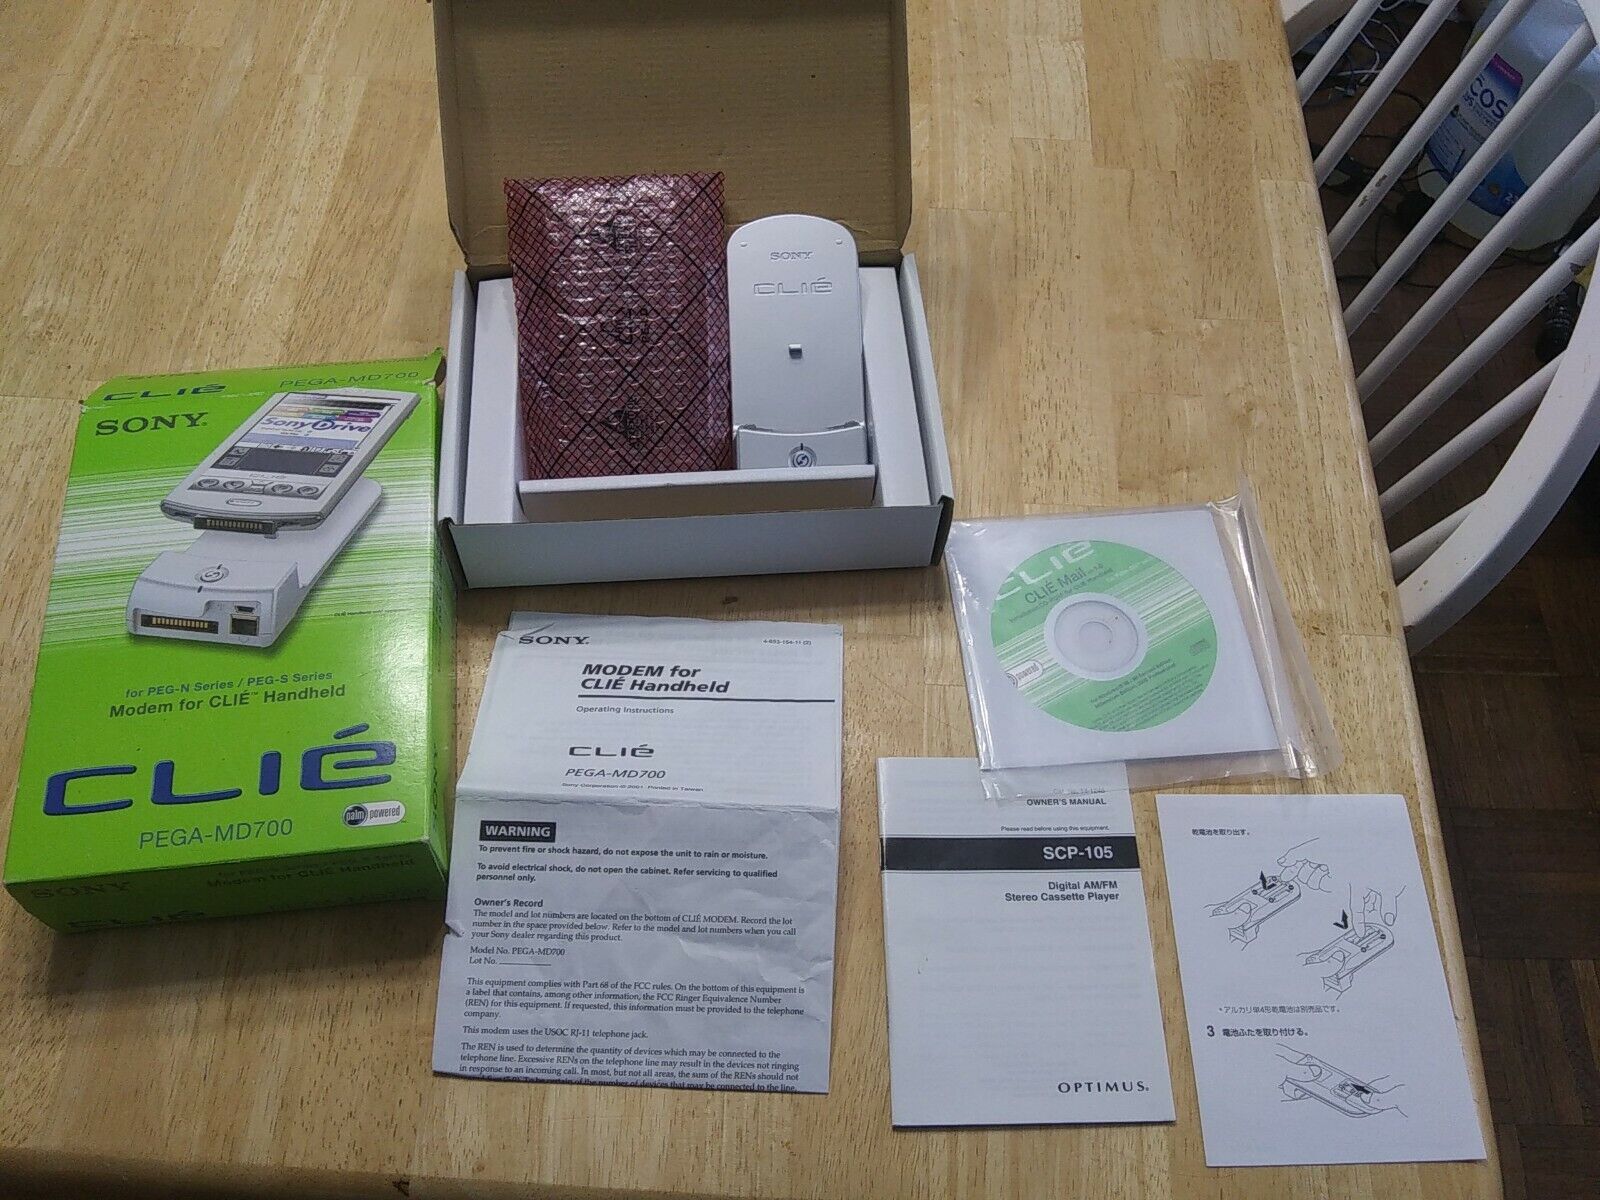 Sony 5 Cheap mail order specialty store ☆ popular CLIE Analog Modem PEGA-MD700 pp